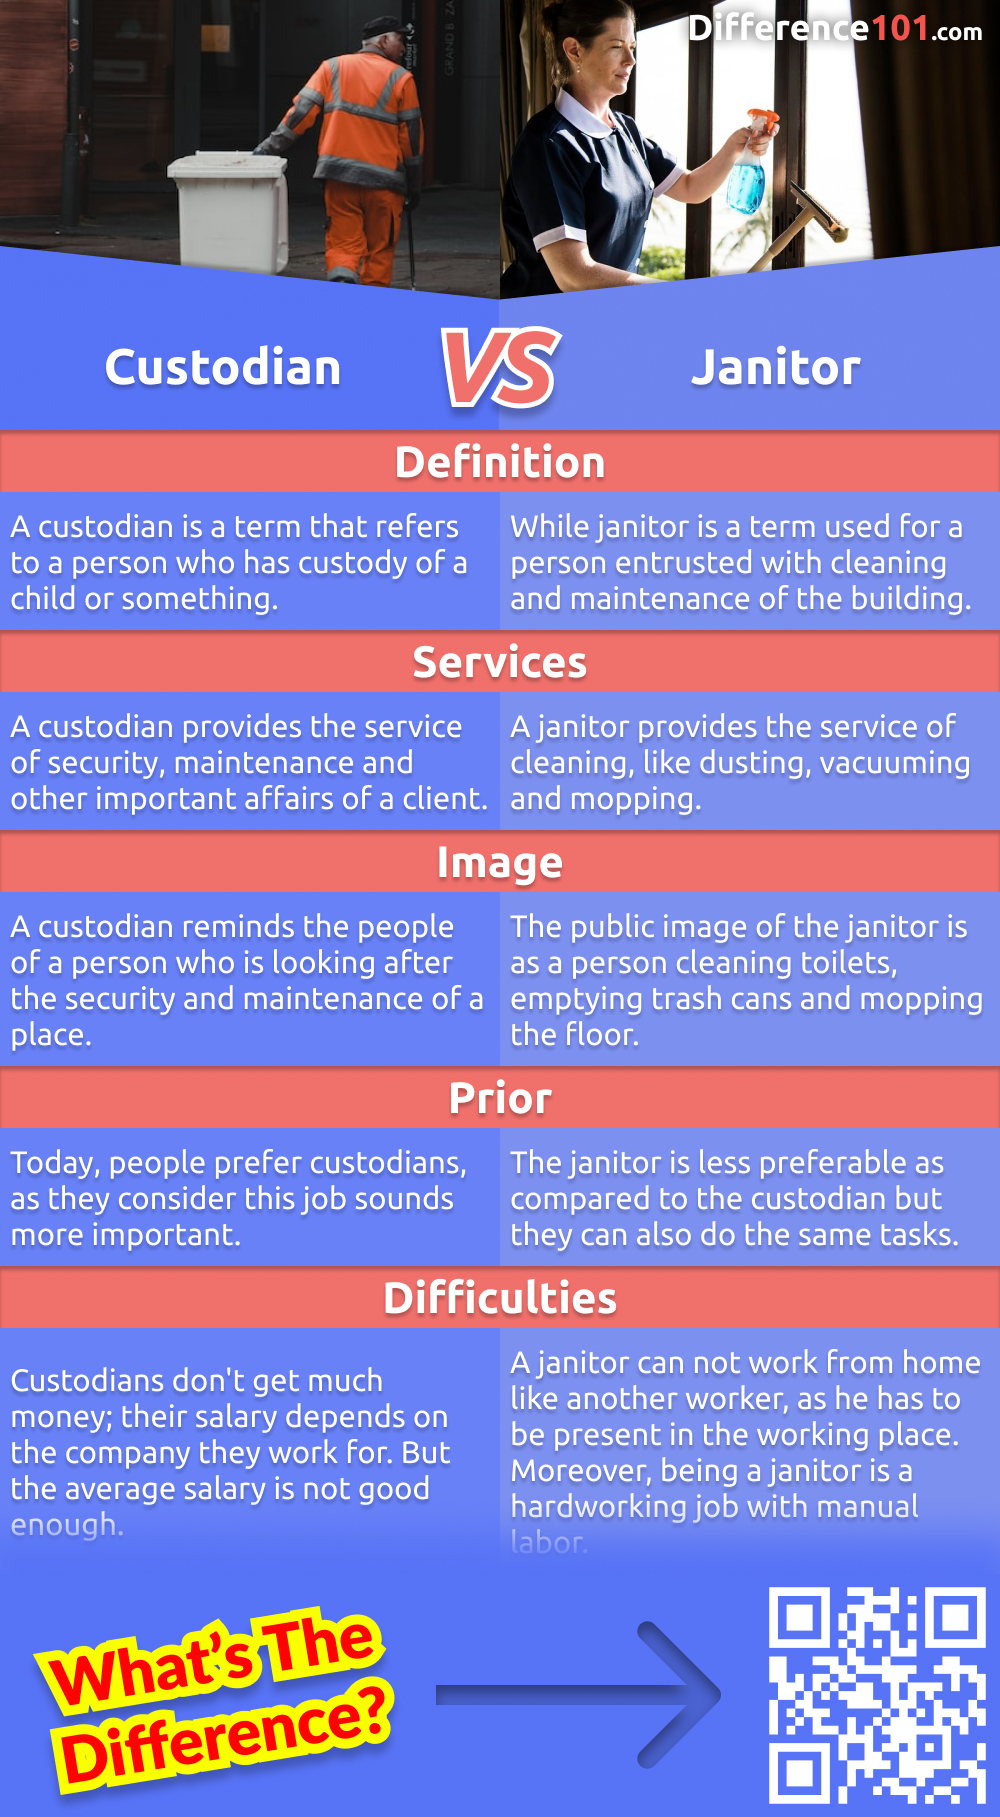 What’s the difference between a custodian and a janitor? Both play an important role in keeping a building clean and safe, their responsibilities are different. Read on to learn more about their differences, pros and cons of each.